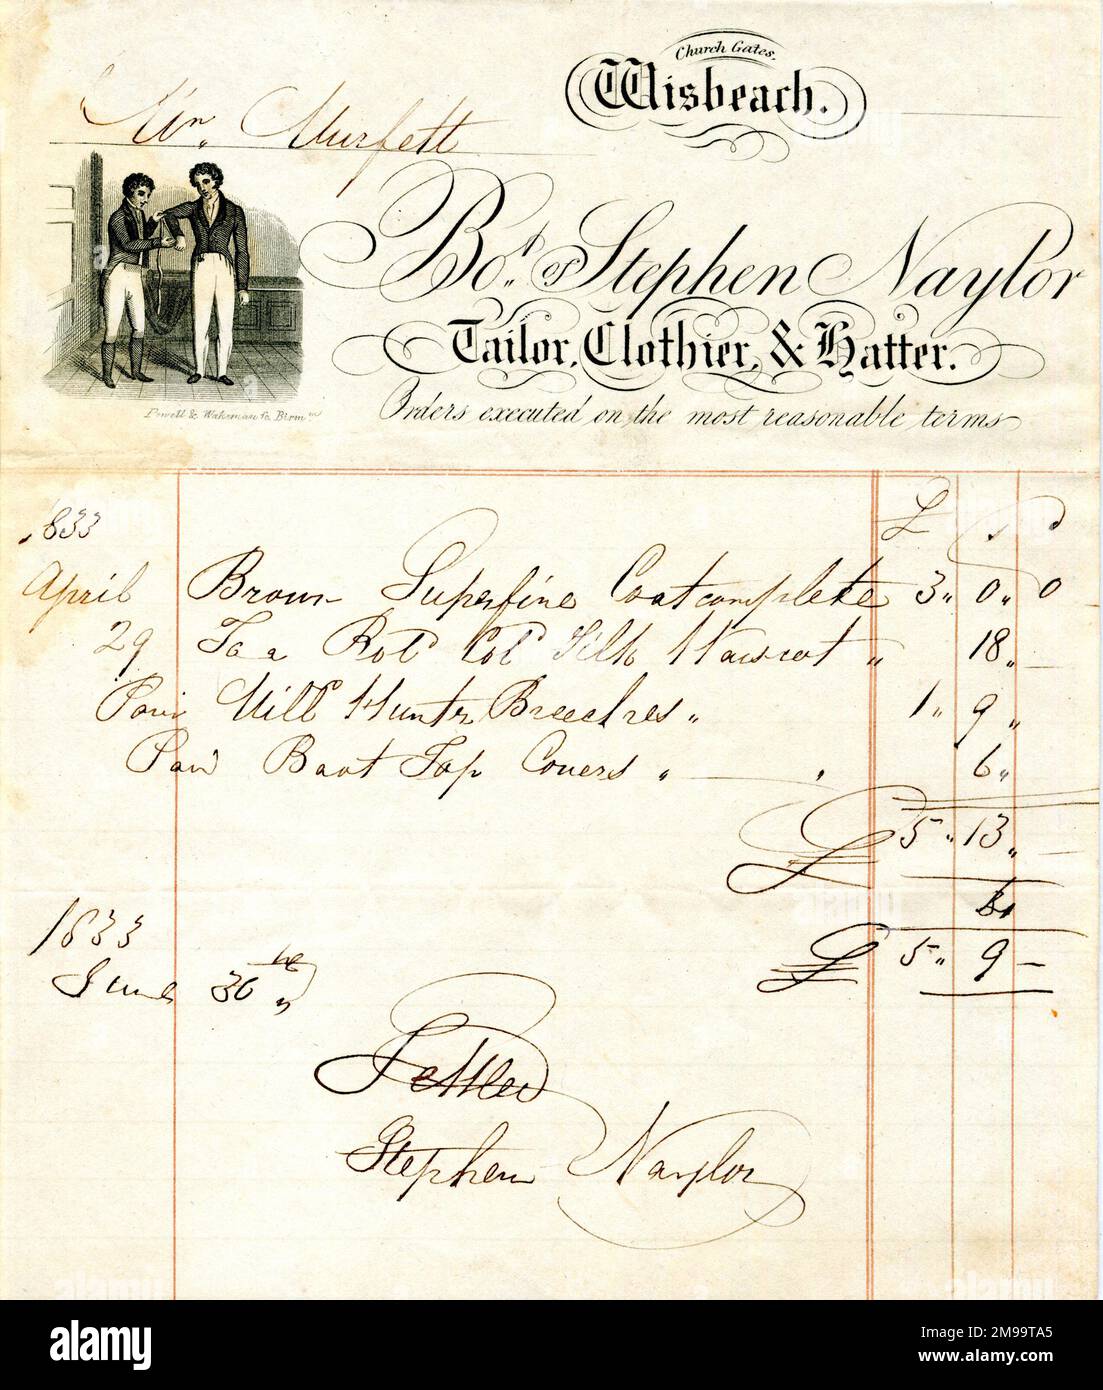 Stationery, Stephen Naylor, Men's Tailor Clothier and Hatter, Church Gates, Wisbeach (Wisbech), Cambridgeshire, with handwritten statement totalling five pounds and nine shillings (paid). Stock Photo